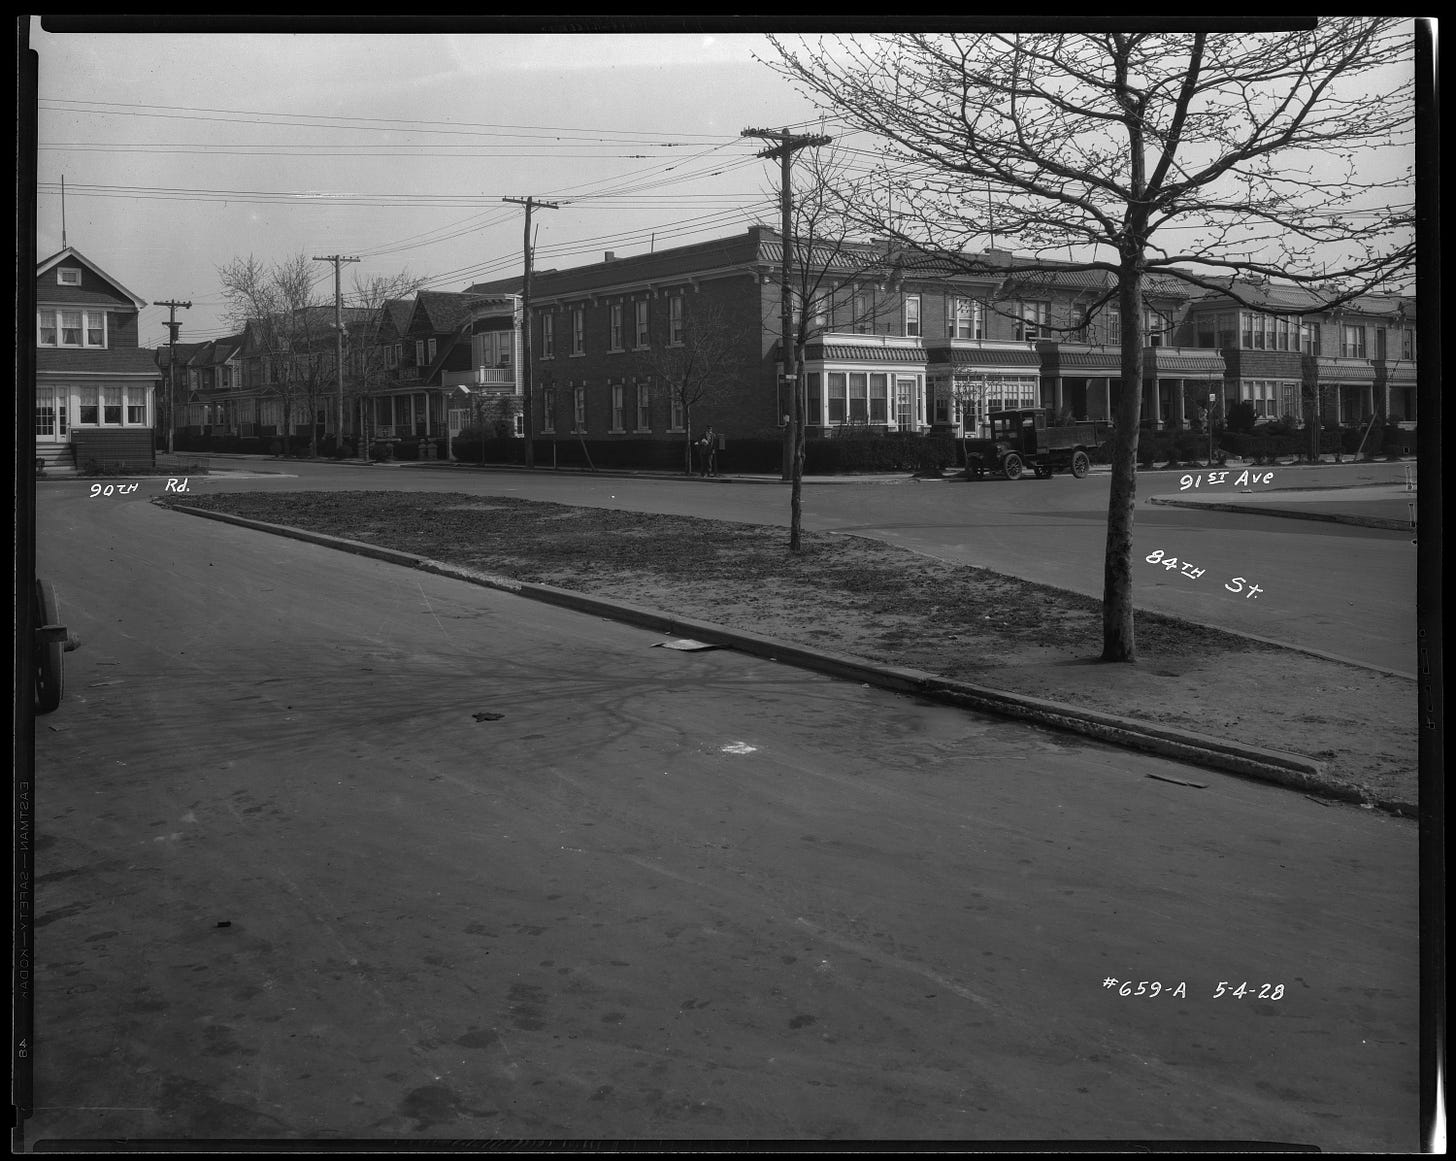 Image shows a photograph from May 1928, before the Whiting Square memorial was created. The median strip in the middle of 84th street is barren but for two trees. 